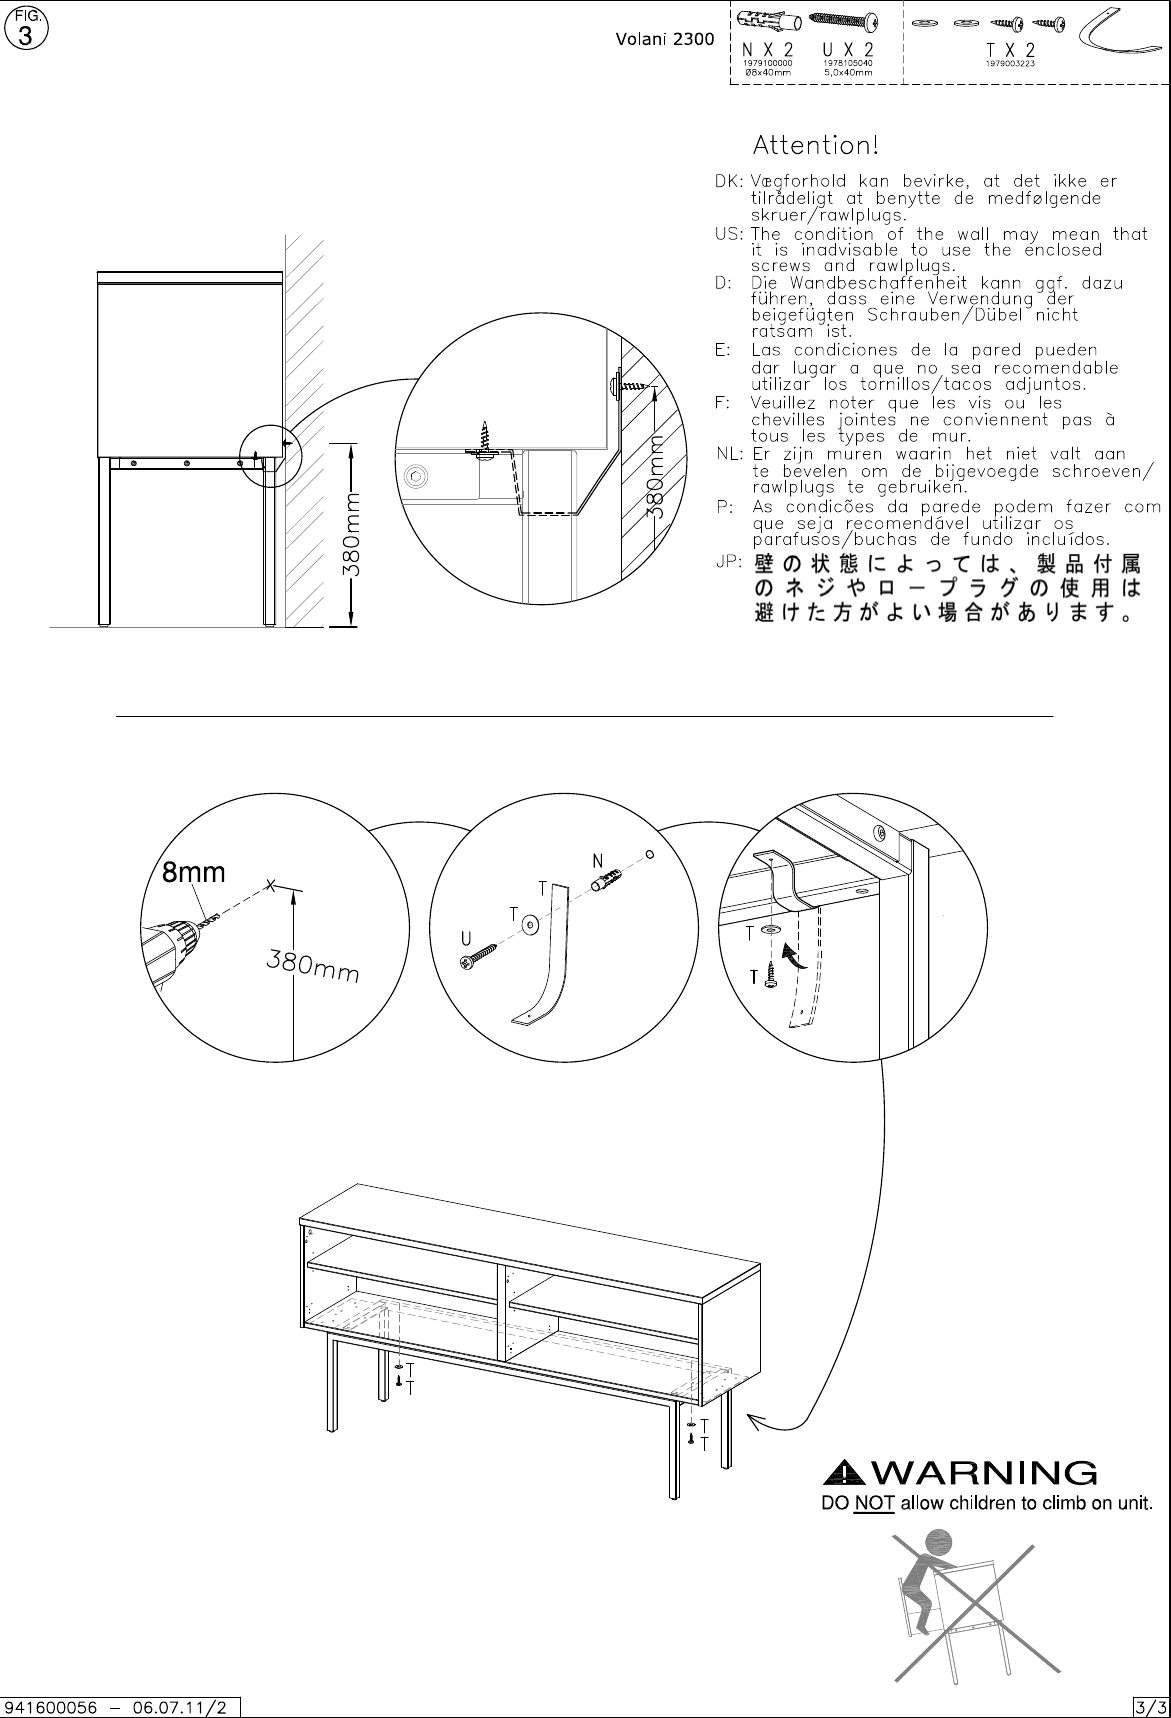 Page 3 of 3 - Boconcept Boconcept--56-Assembly-Instruction B:\DK_PTA_Share\Inventor Ation\360 Volani\Volani 0056\Assembly Instruction\941600056_v2_lev